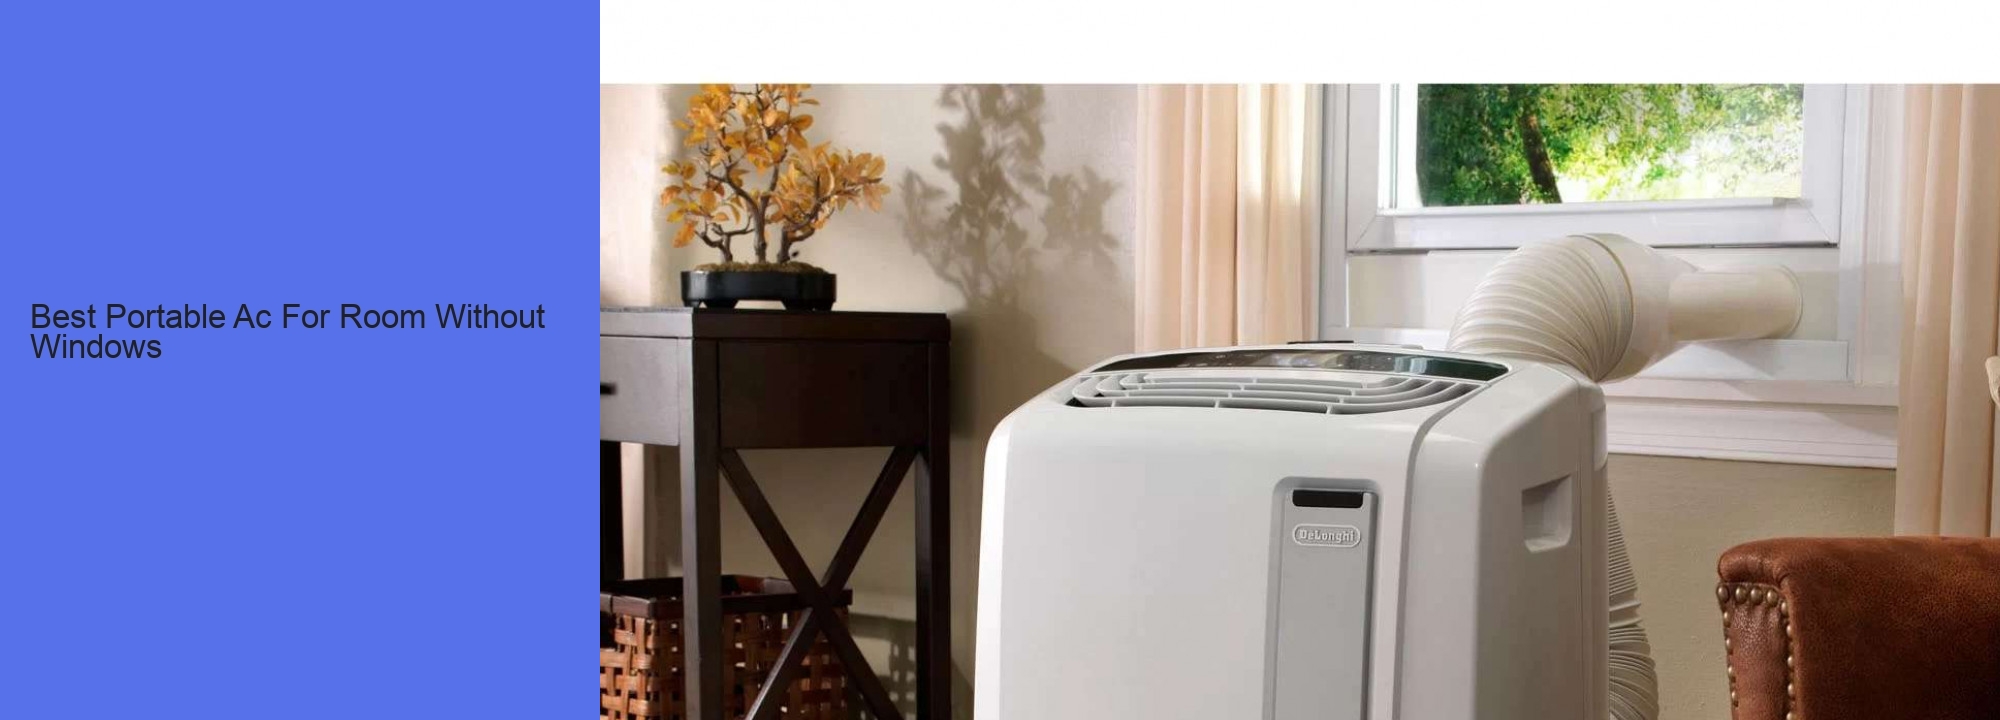 Best Portable Ac For Room Without Windows